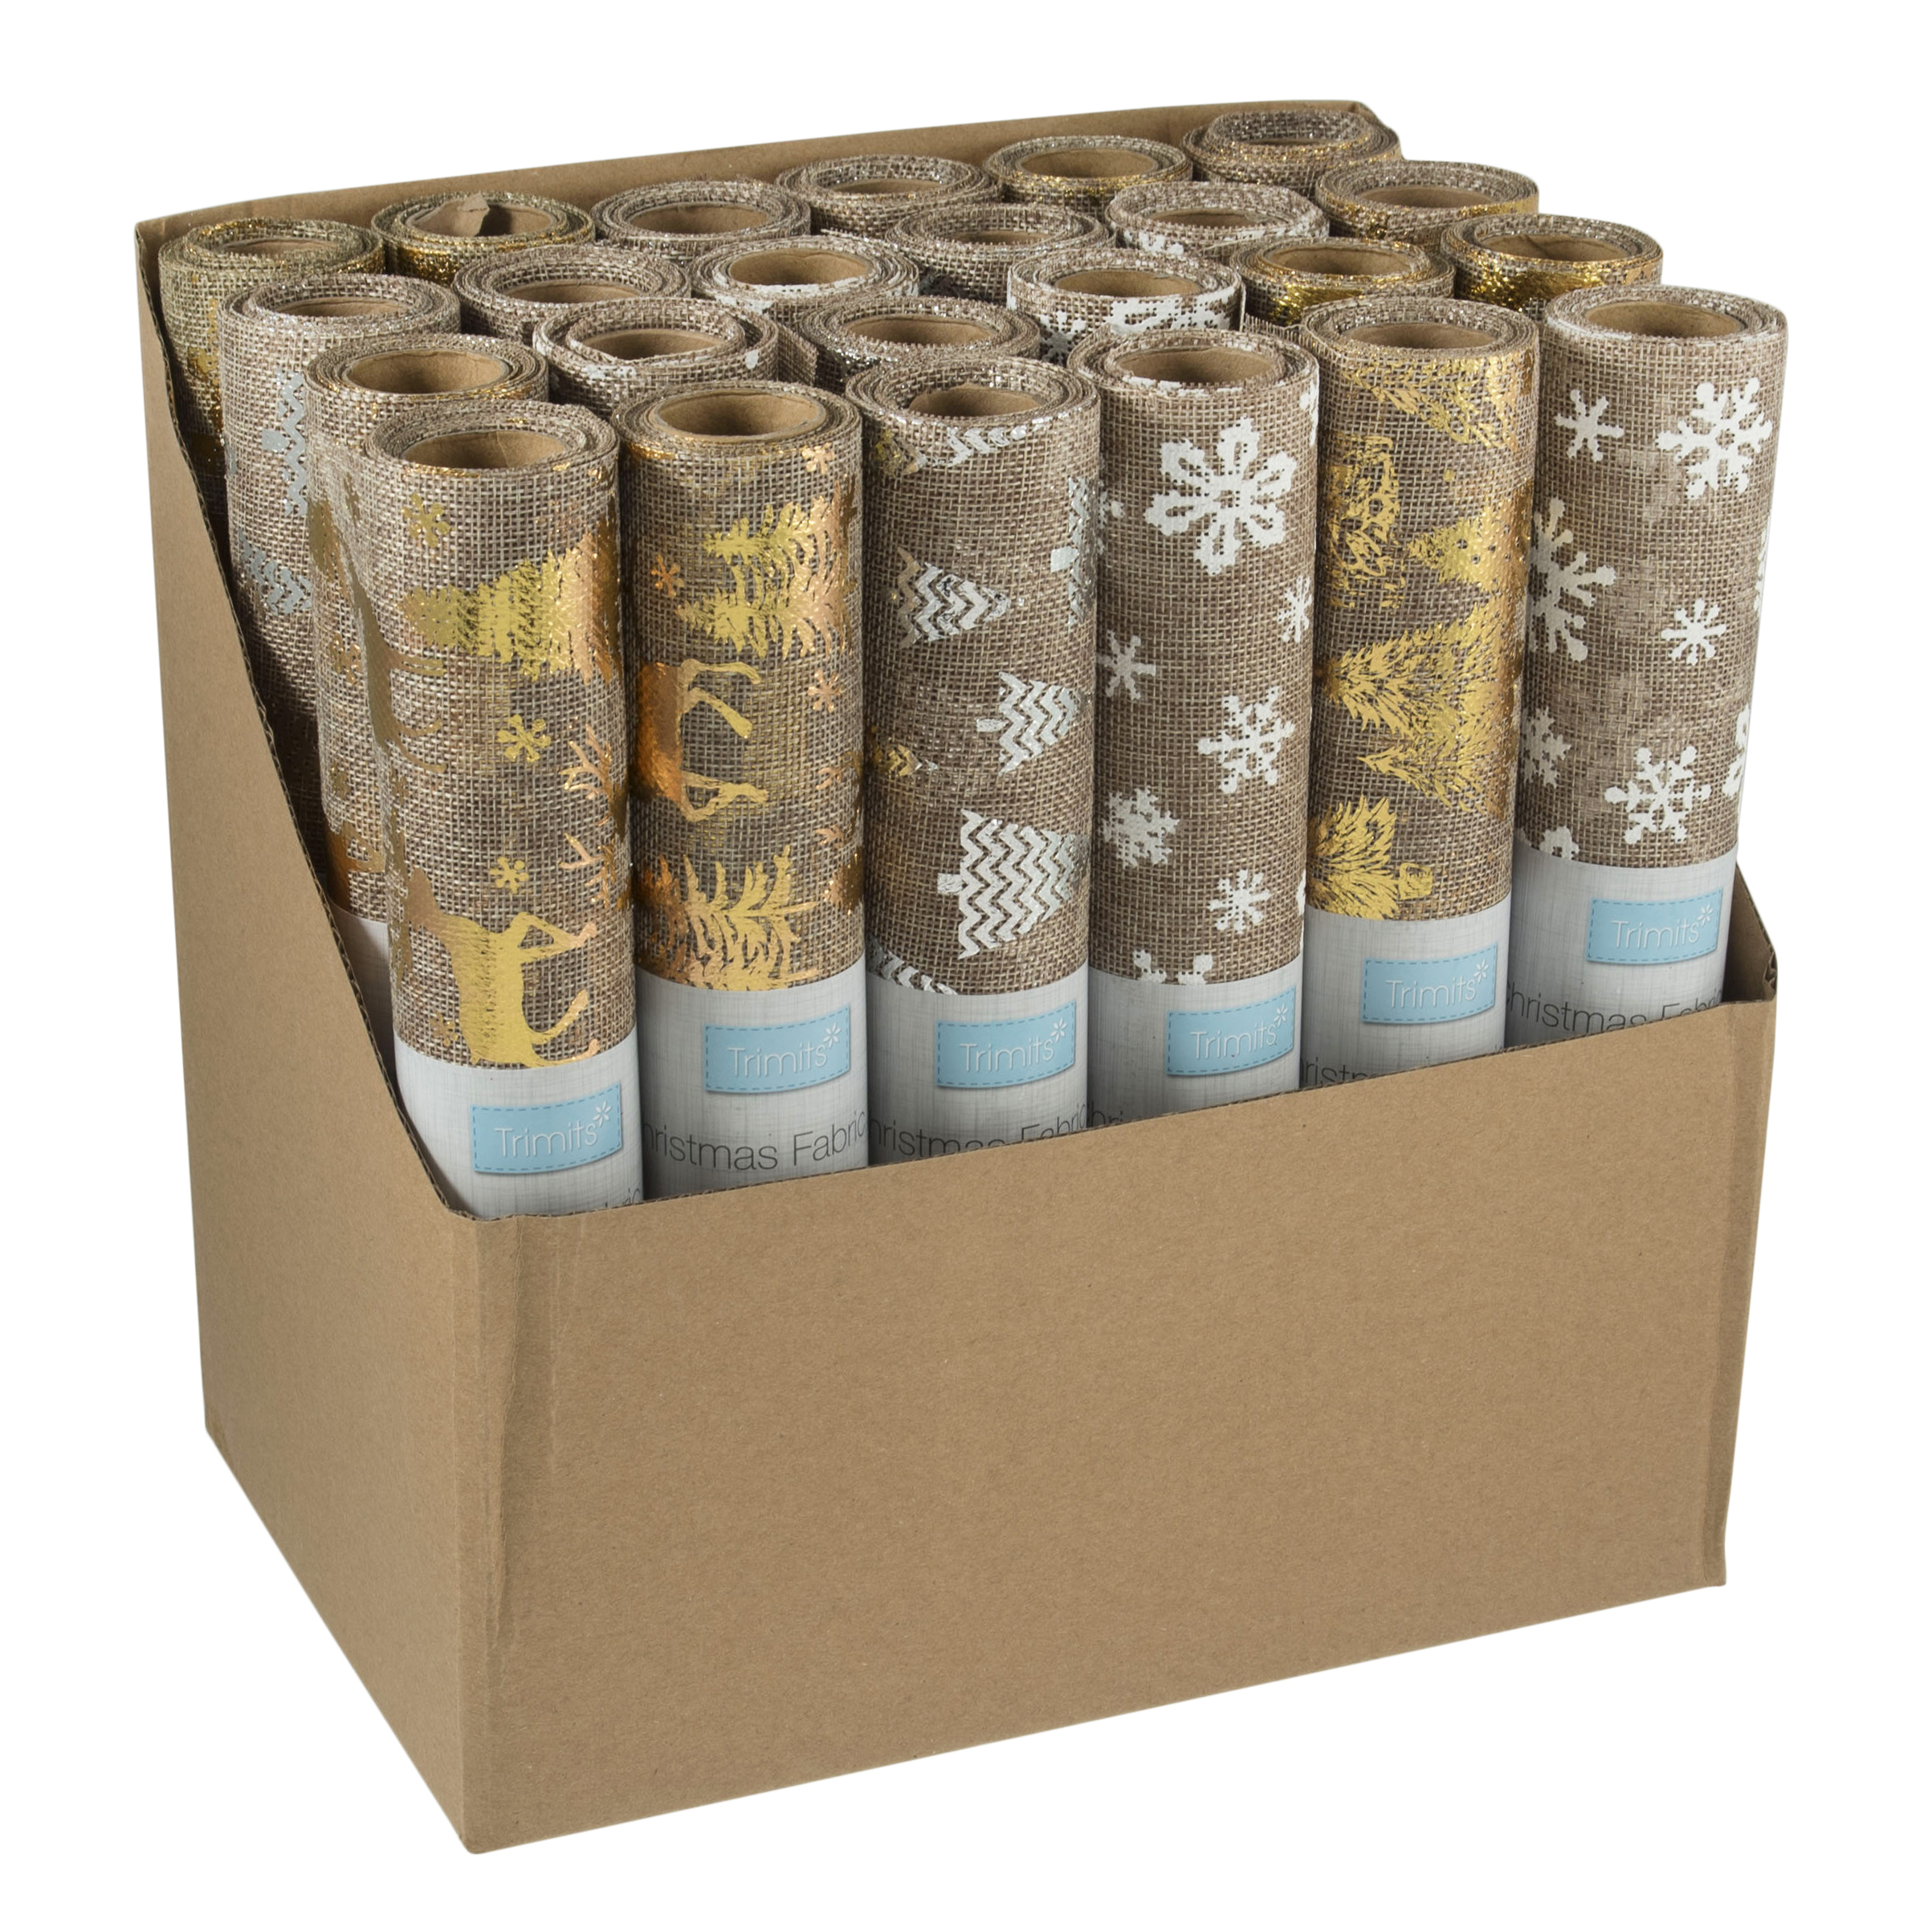 Picture of Counter Display Unit: Christmas Fabric Roll: 2m x 28cm: 24 Rolls: White/Gold/Silver